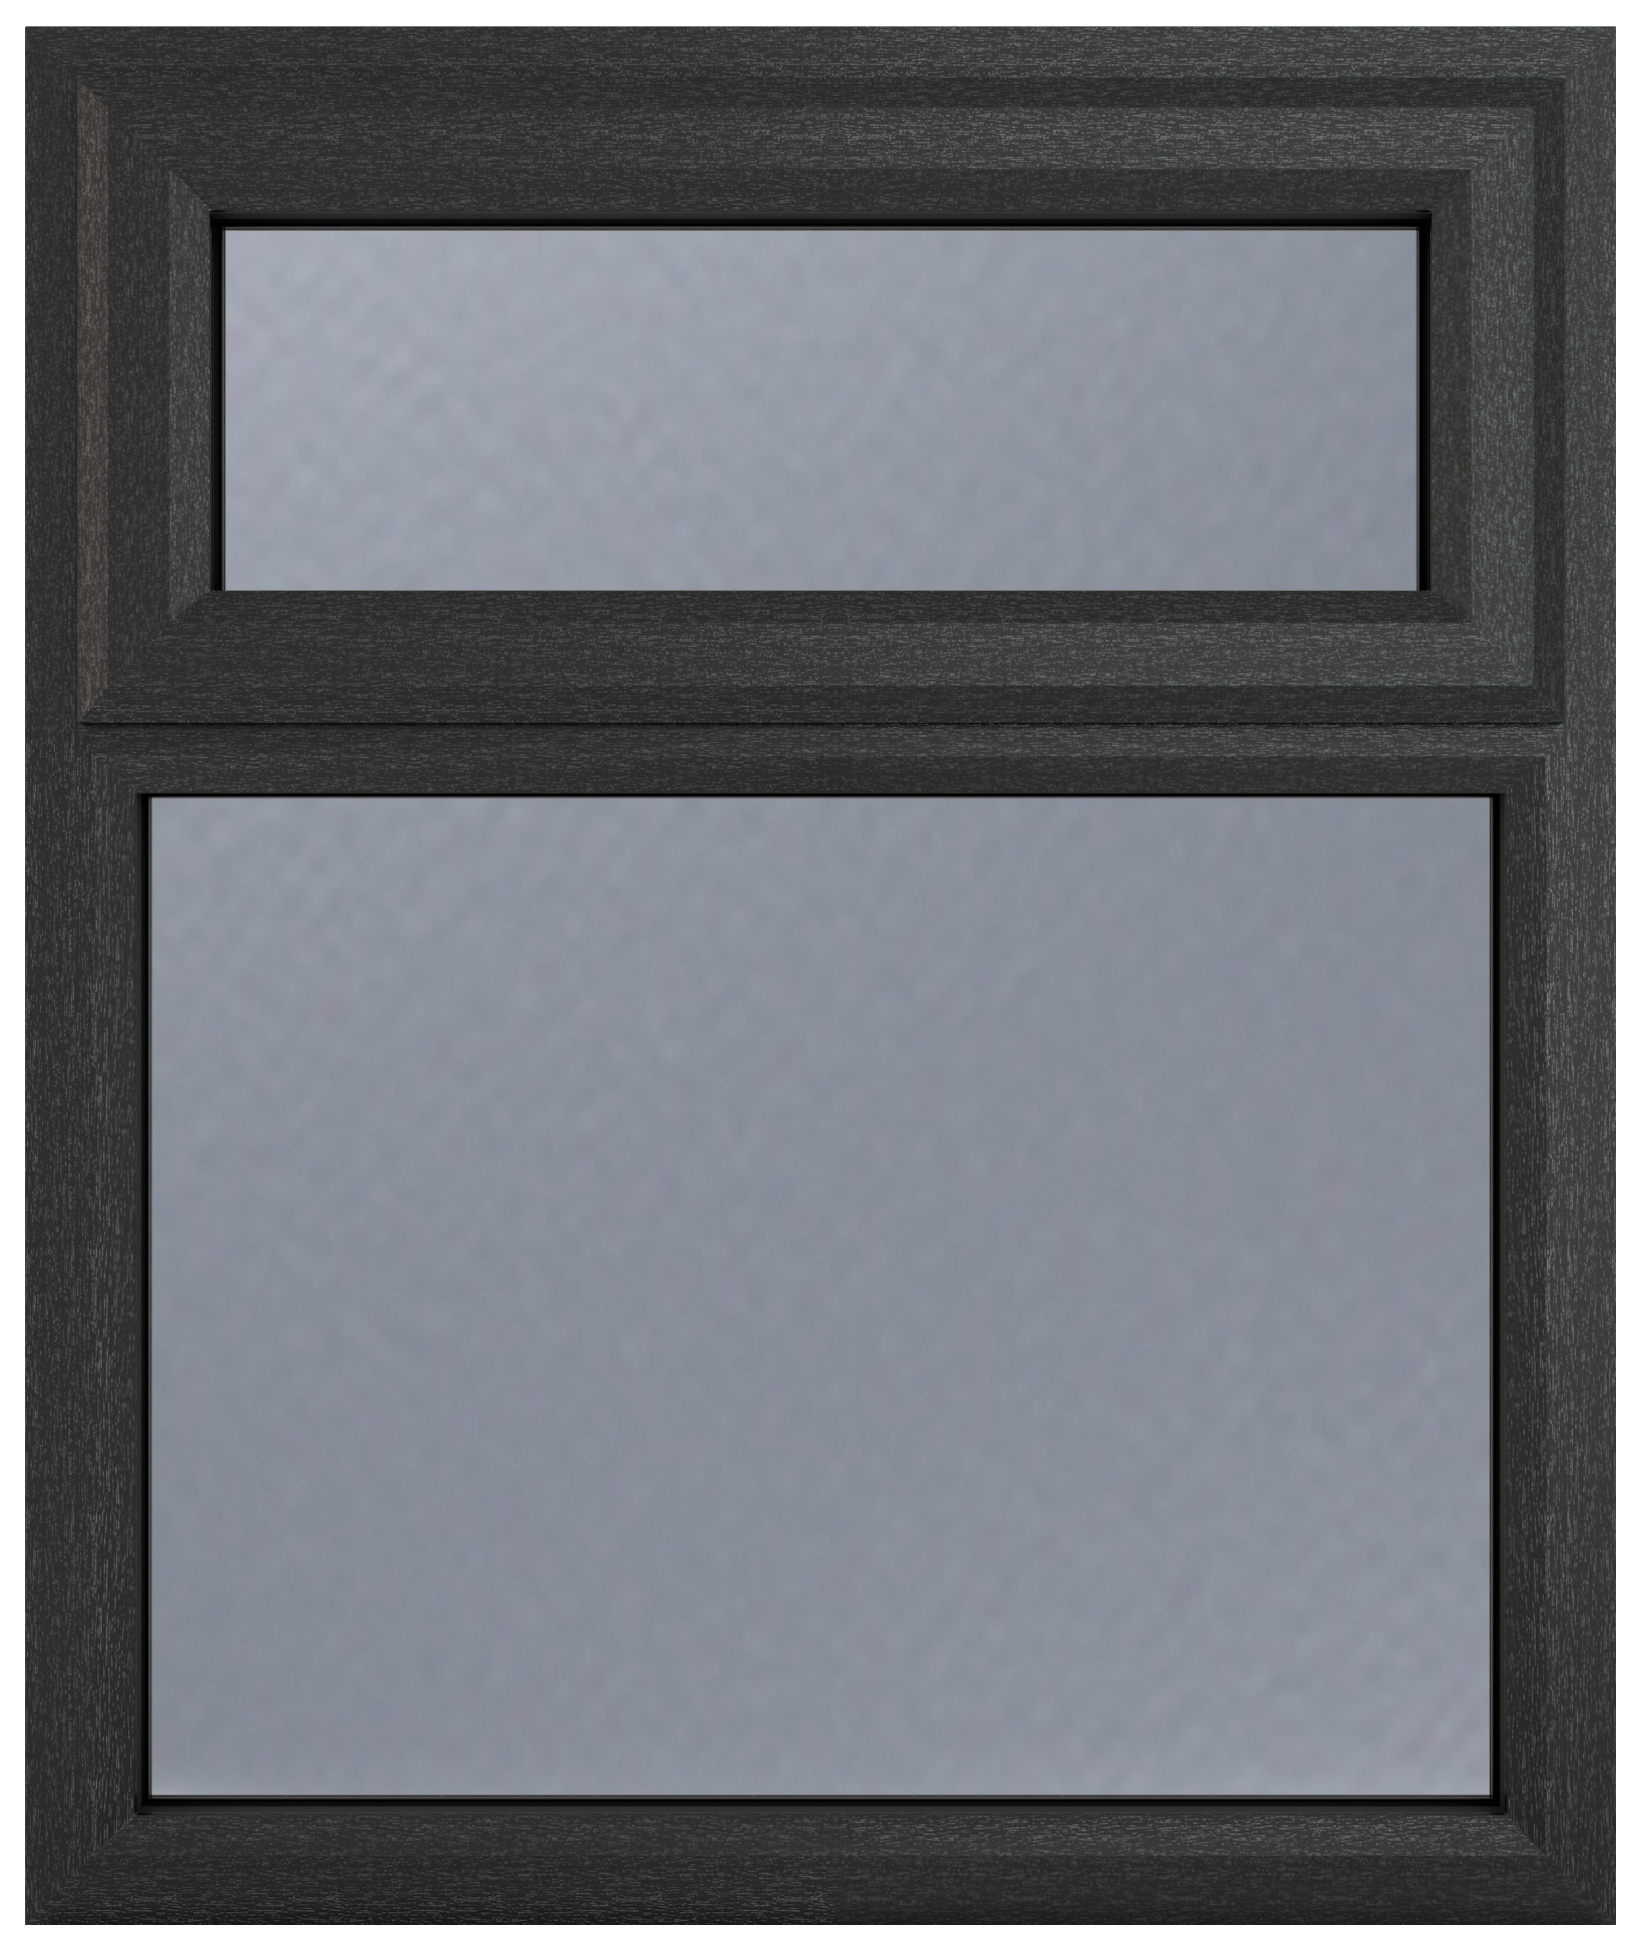 Crystal uPVC Grey Top Hung Opener Obscure Double Glazed Fixed Light Window - 905 x 1115mm